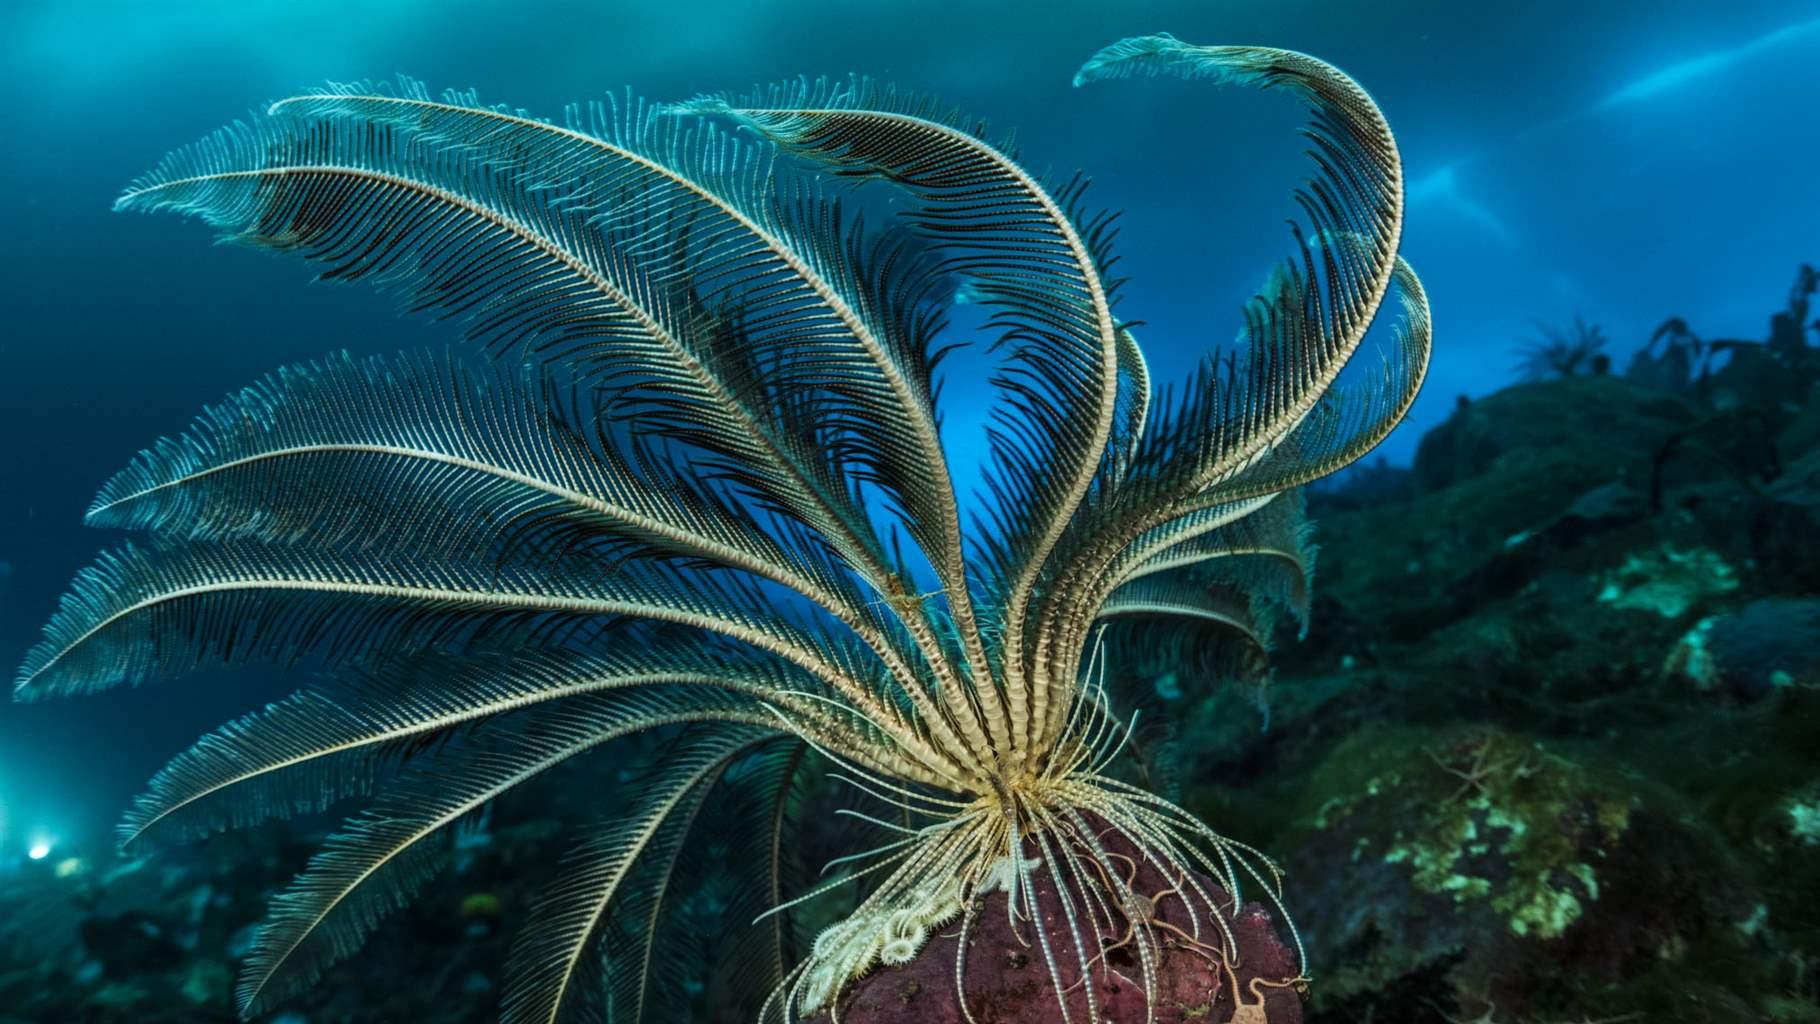 Southern Ocean biodiversity is much more than just penguins; it also includes this giant feather star on the seafloor under the ice in East Antarctica.